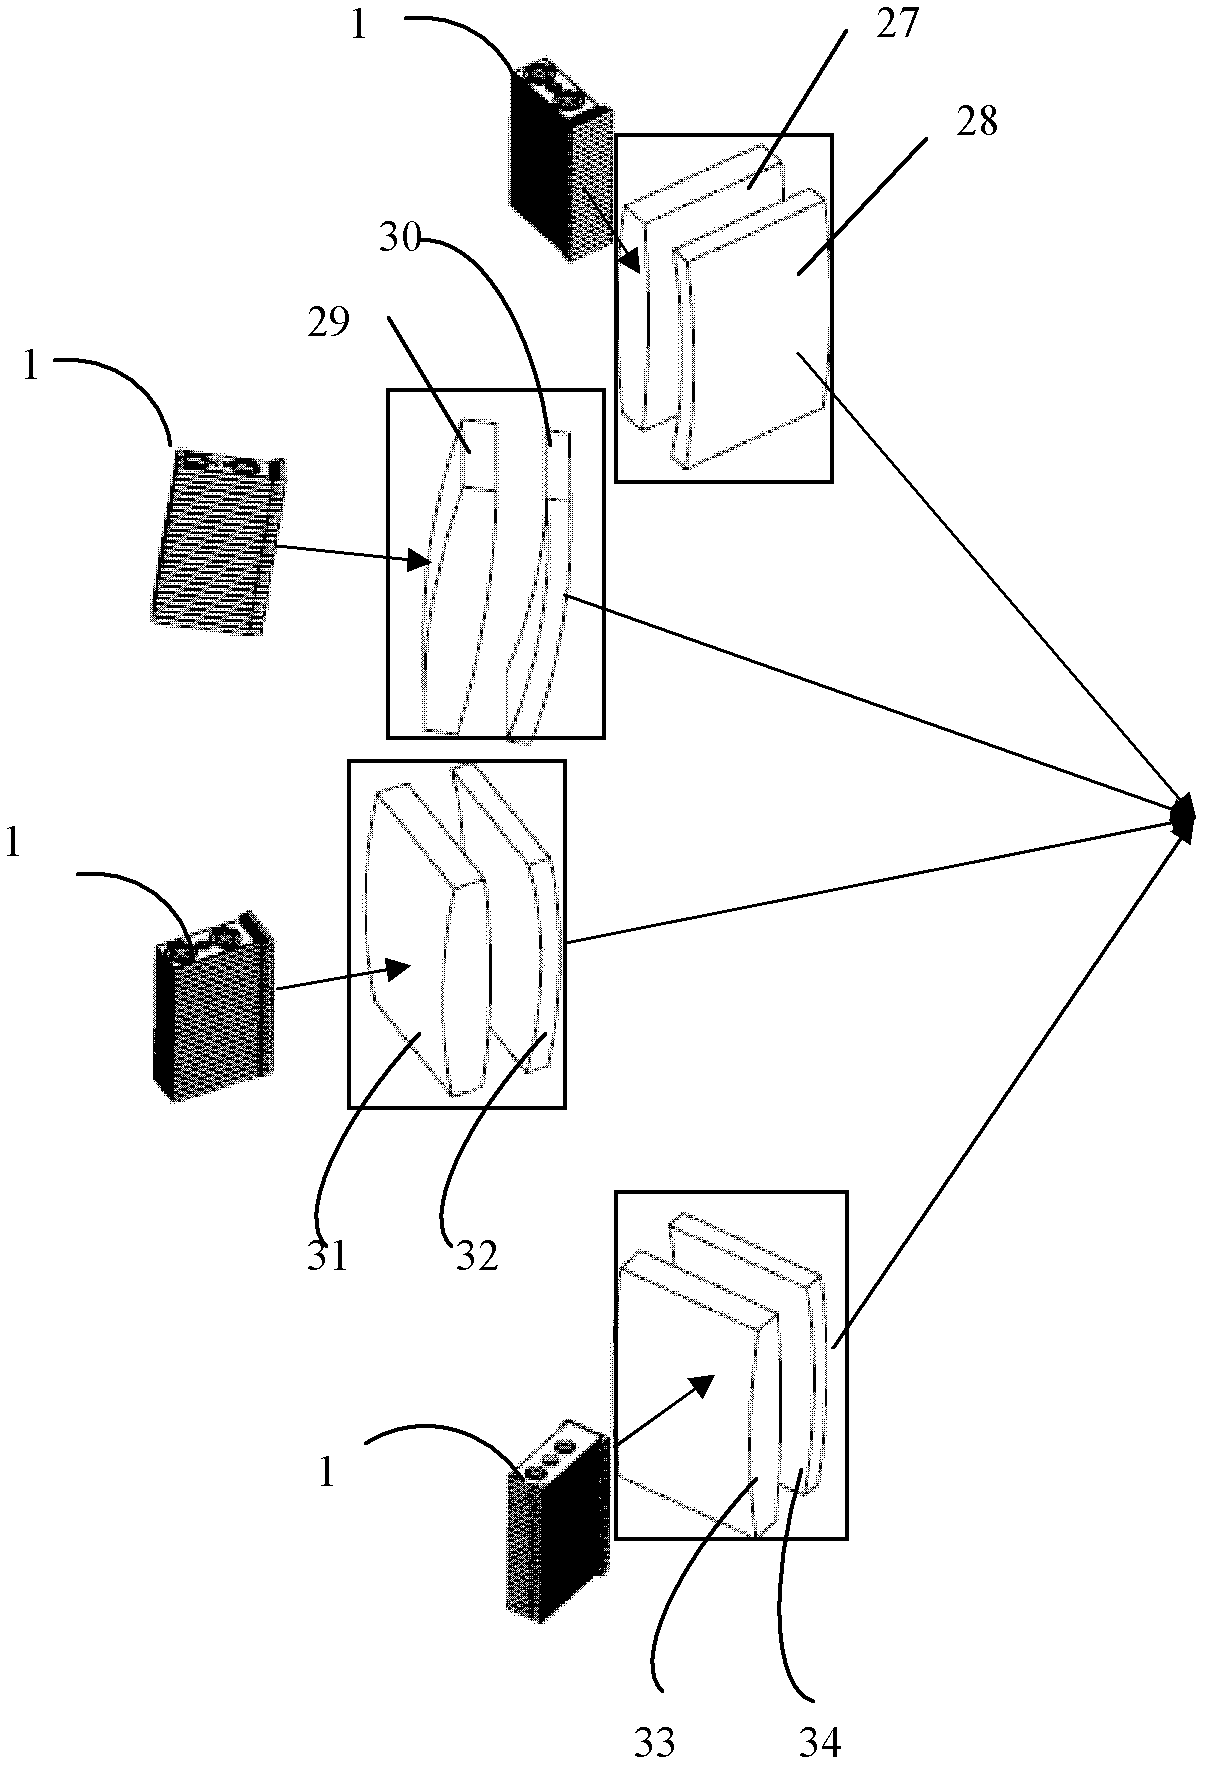 High-power semiconductor laser light source system for laser processing